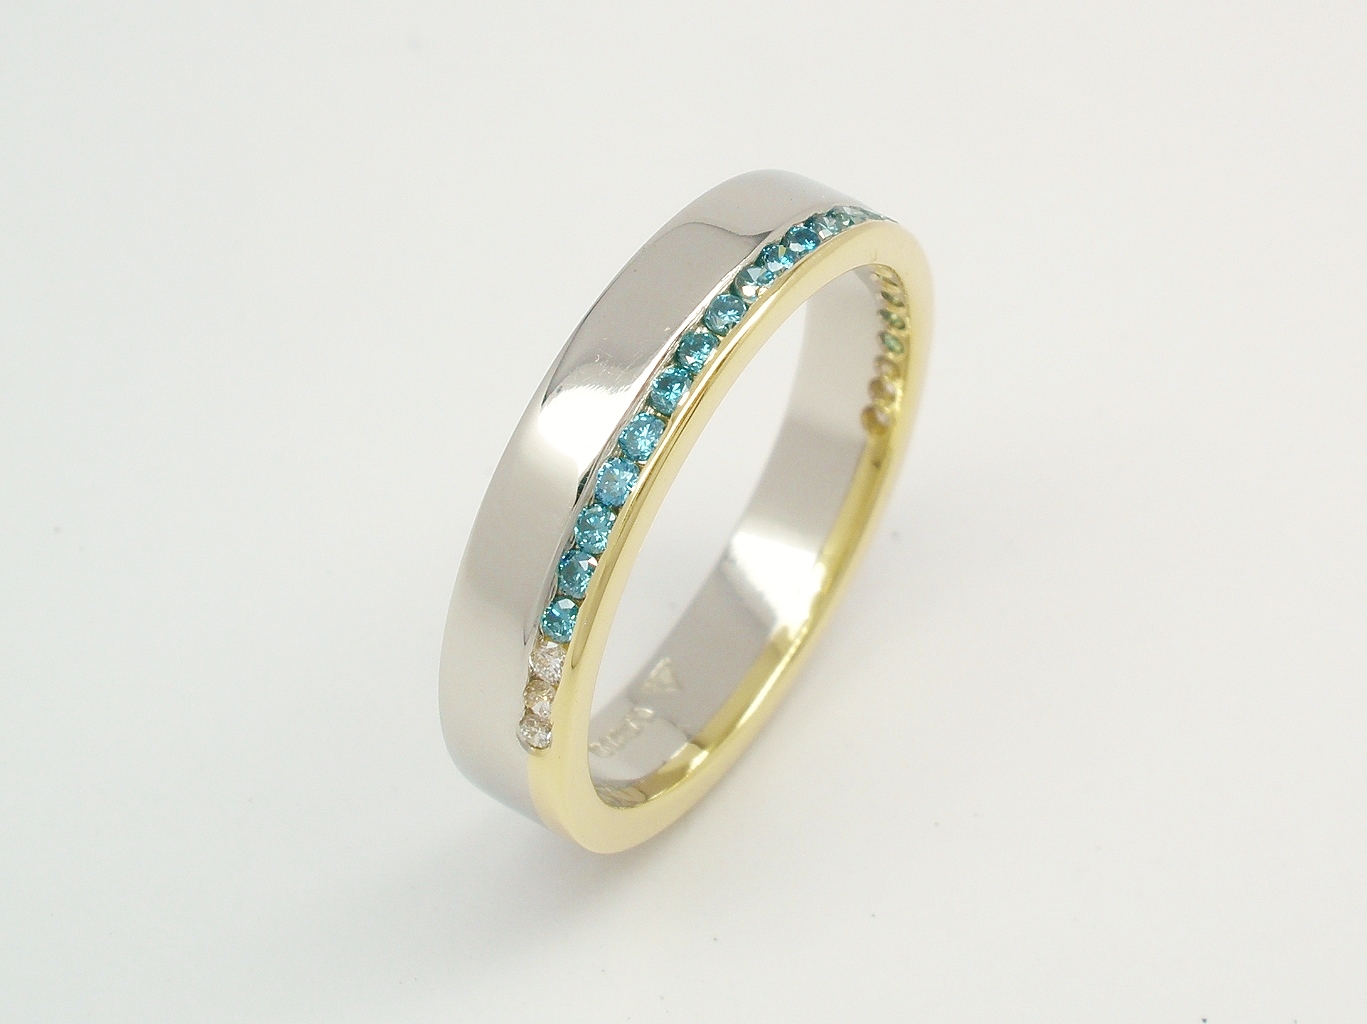 A 26 stone Sky Blue and white round brilliant cut diamond offset style wedding ring mounted in platinum and 18ct. yellow gold.